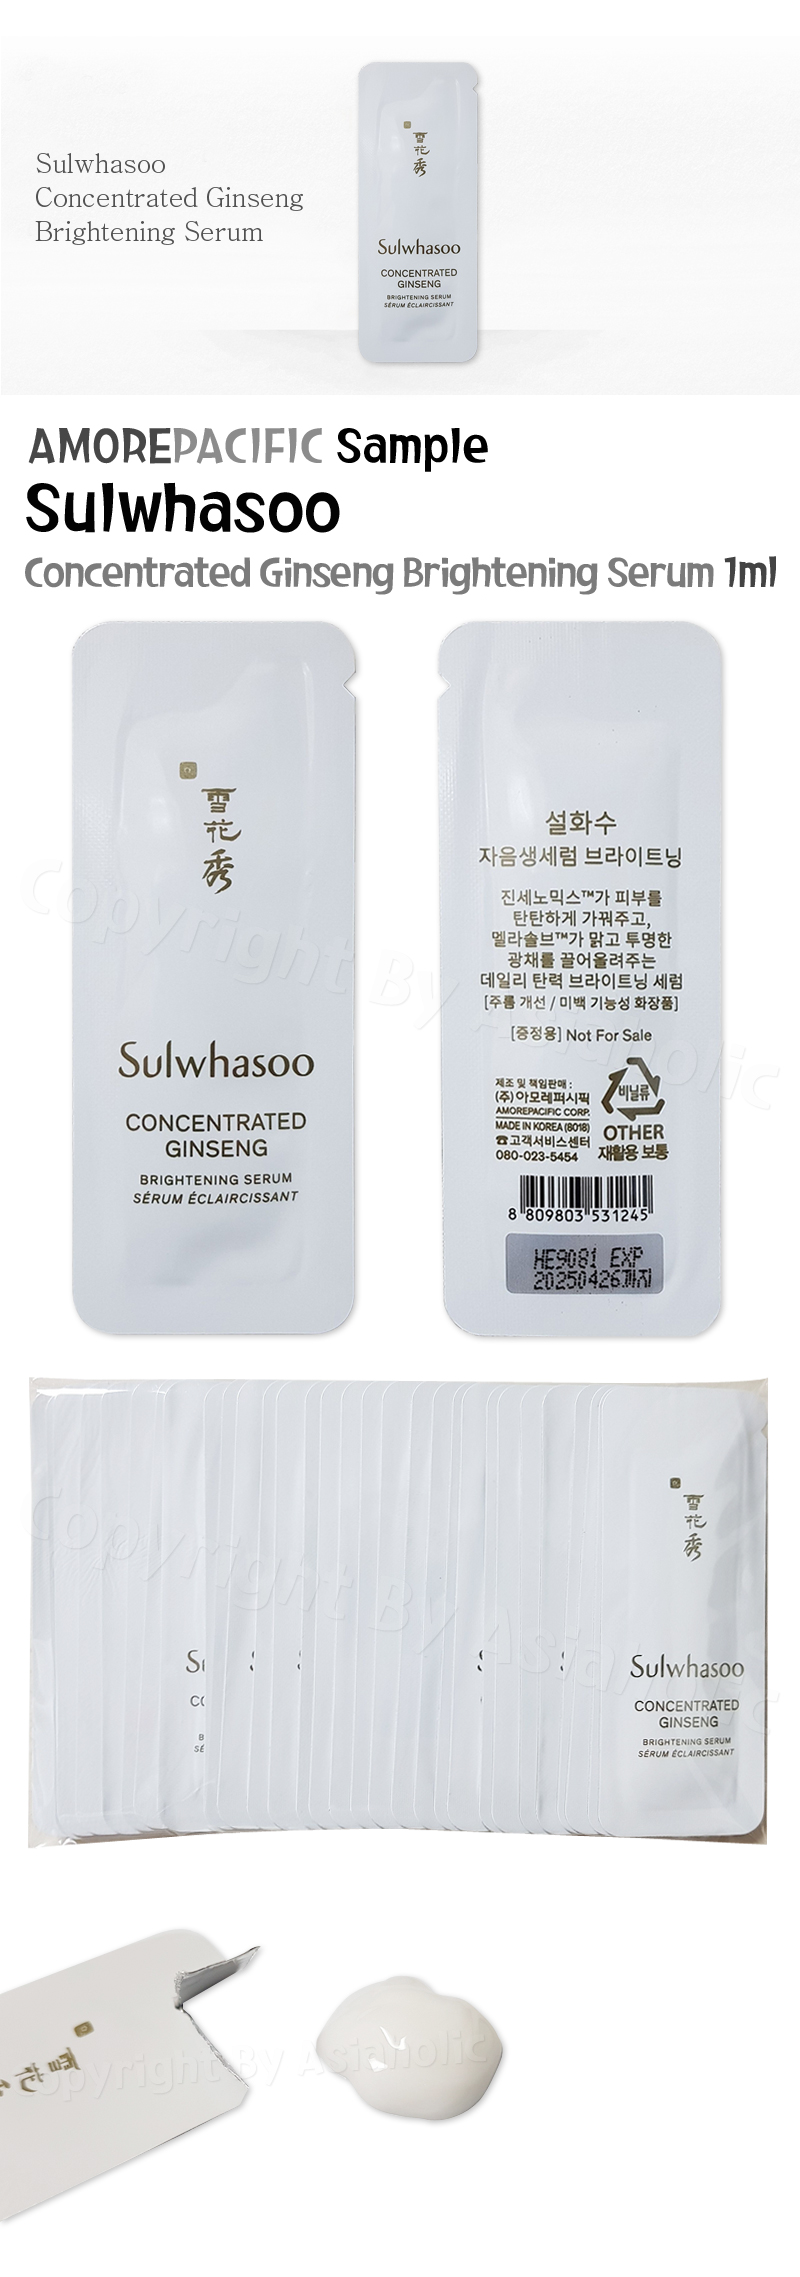 Sulwhasoo Concentrated Ginseng Brightening Serum 1ml (10pcs ~ 130pcs) Newest Version